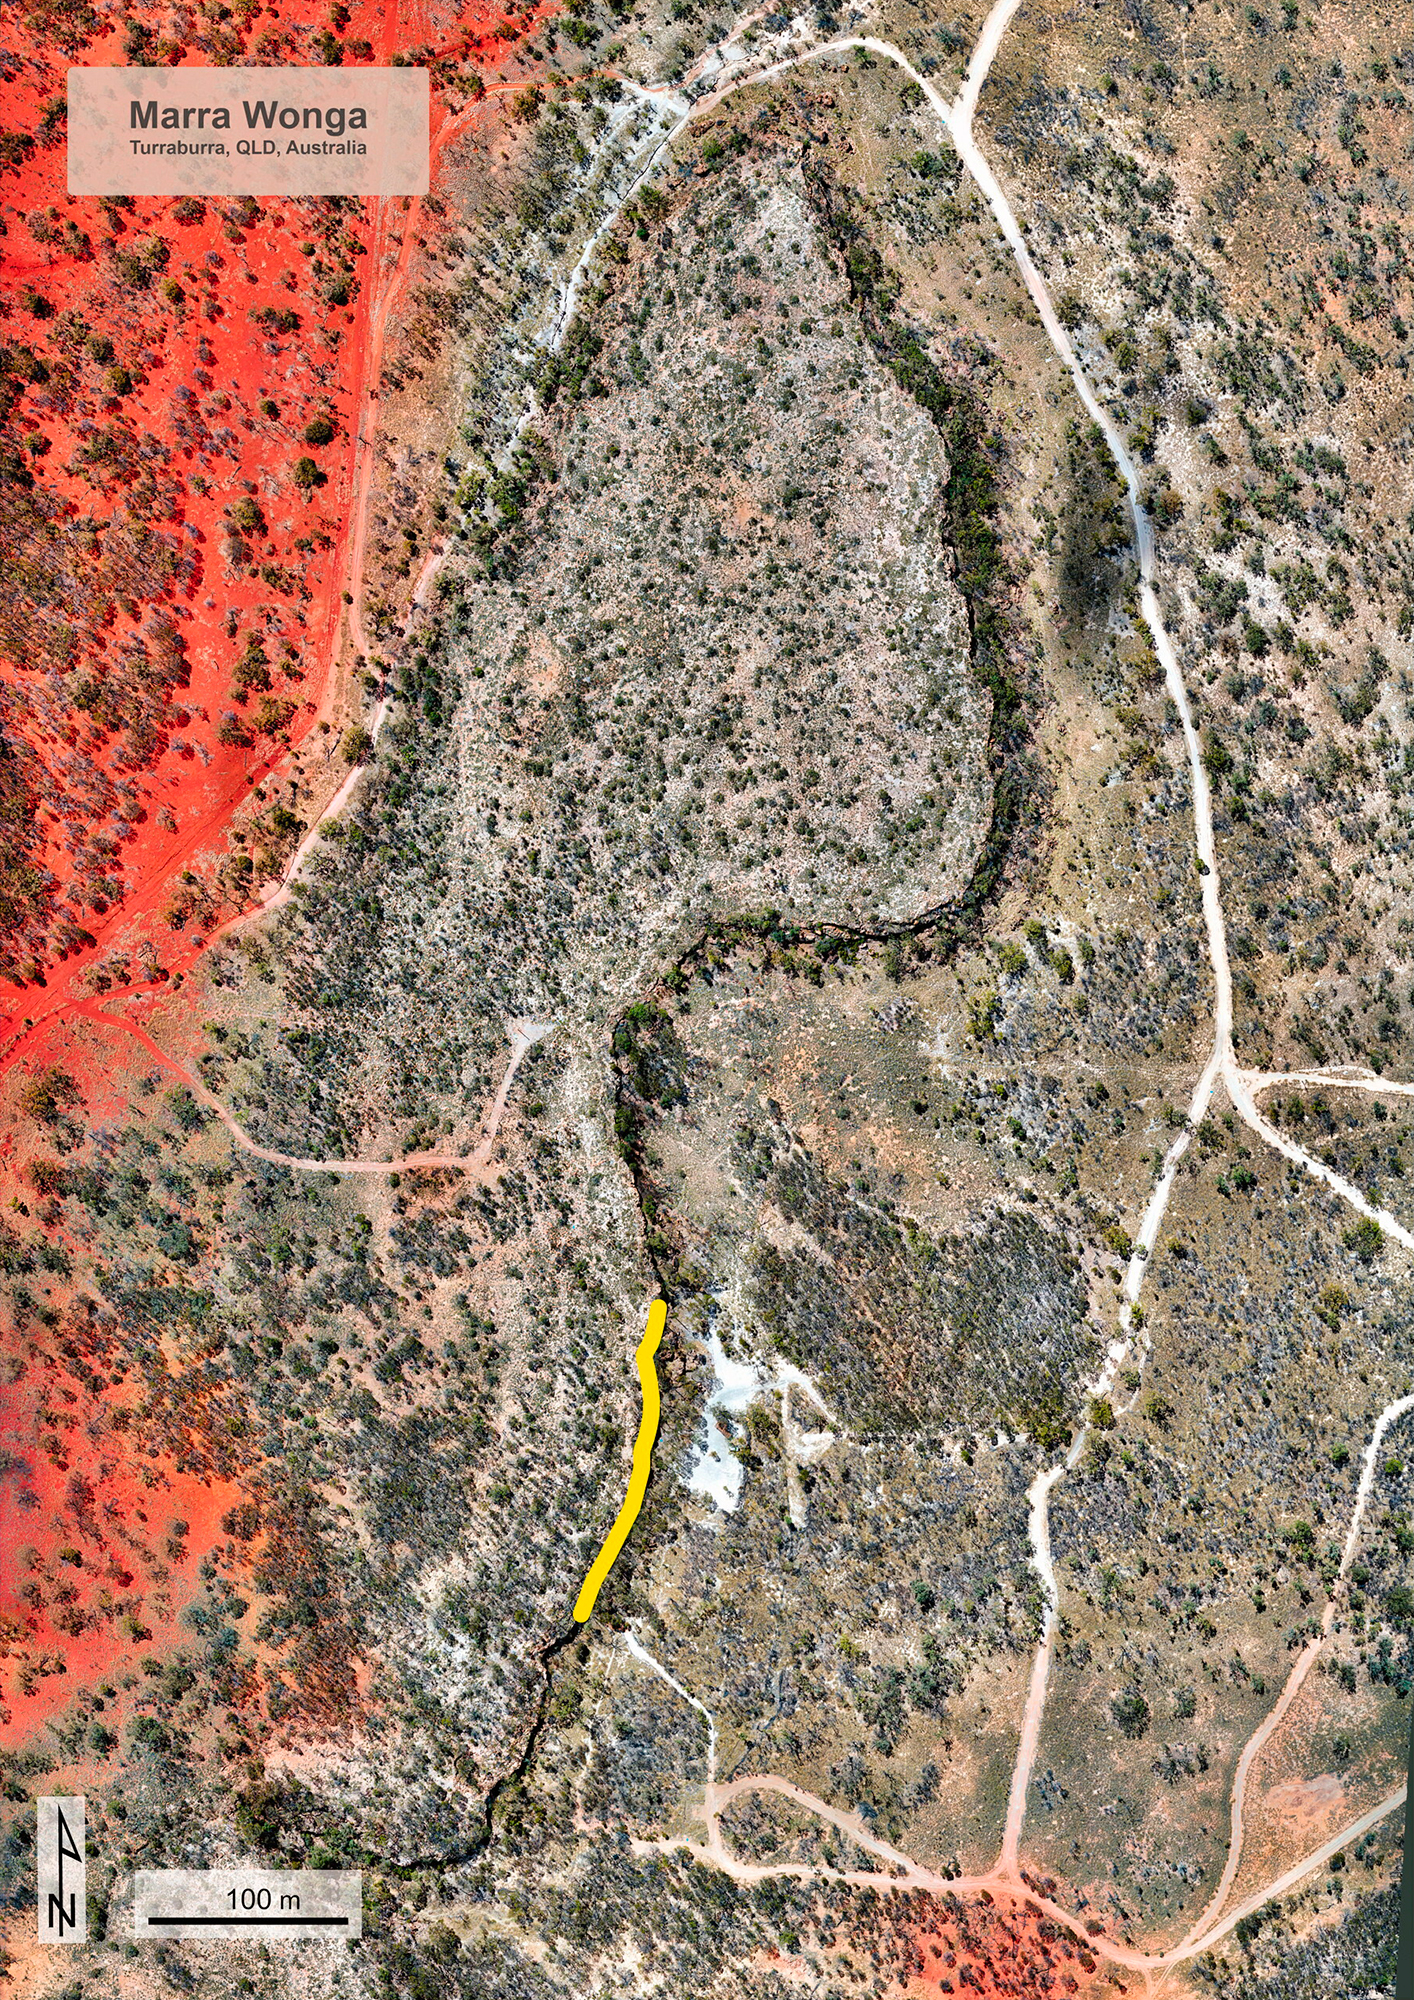 Orthomosaic of Marra Wonga (Gracevale rock art site) created from drone images with yellow line 162 metres in length (straight distance 158 metres) delineating the extent of the rock art panel